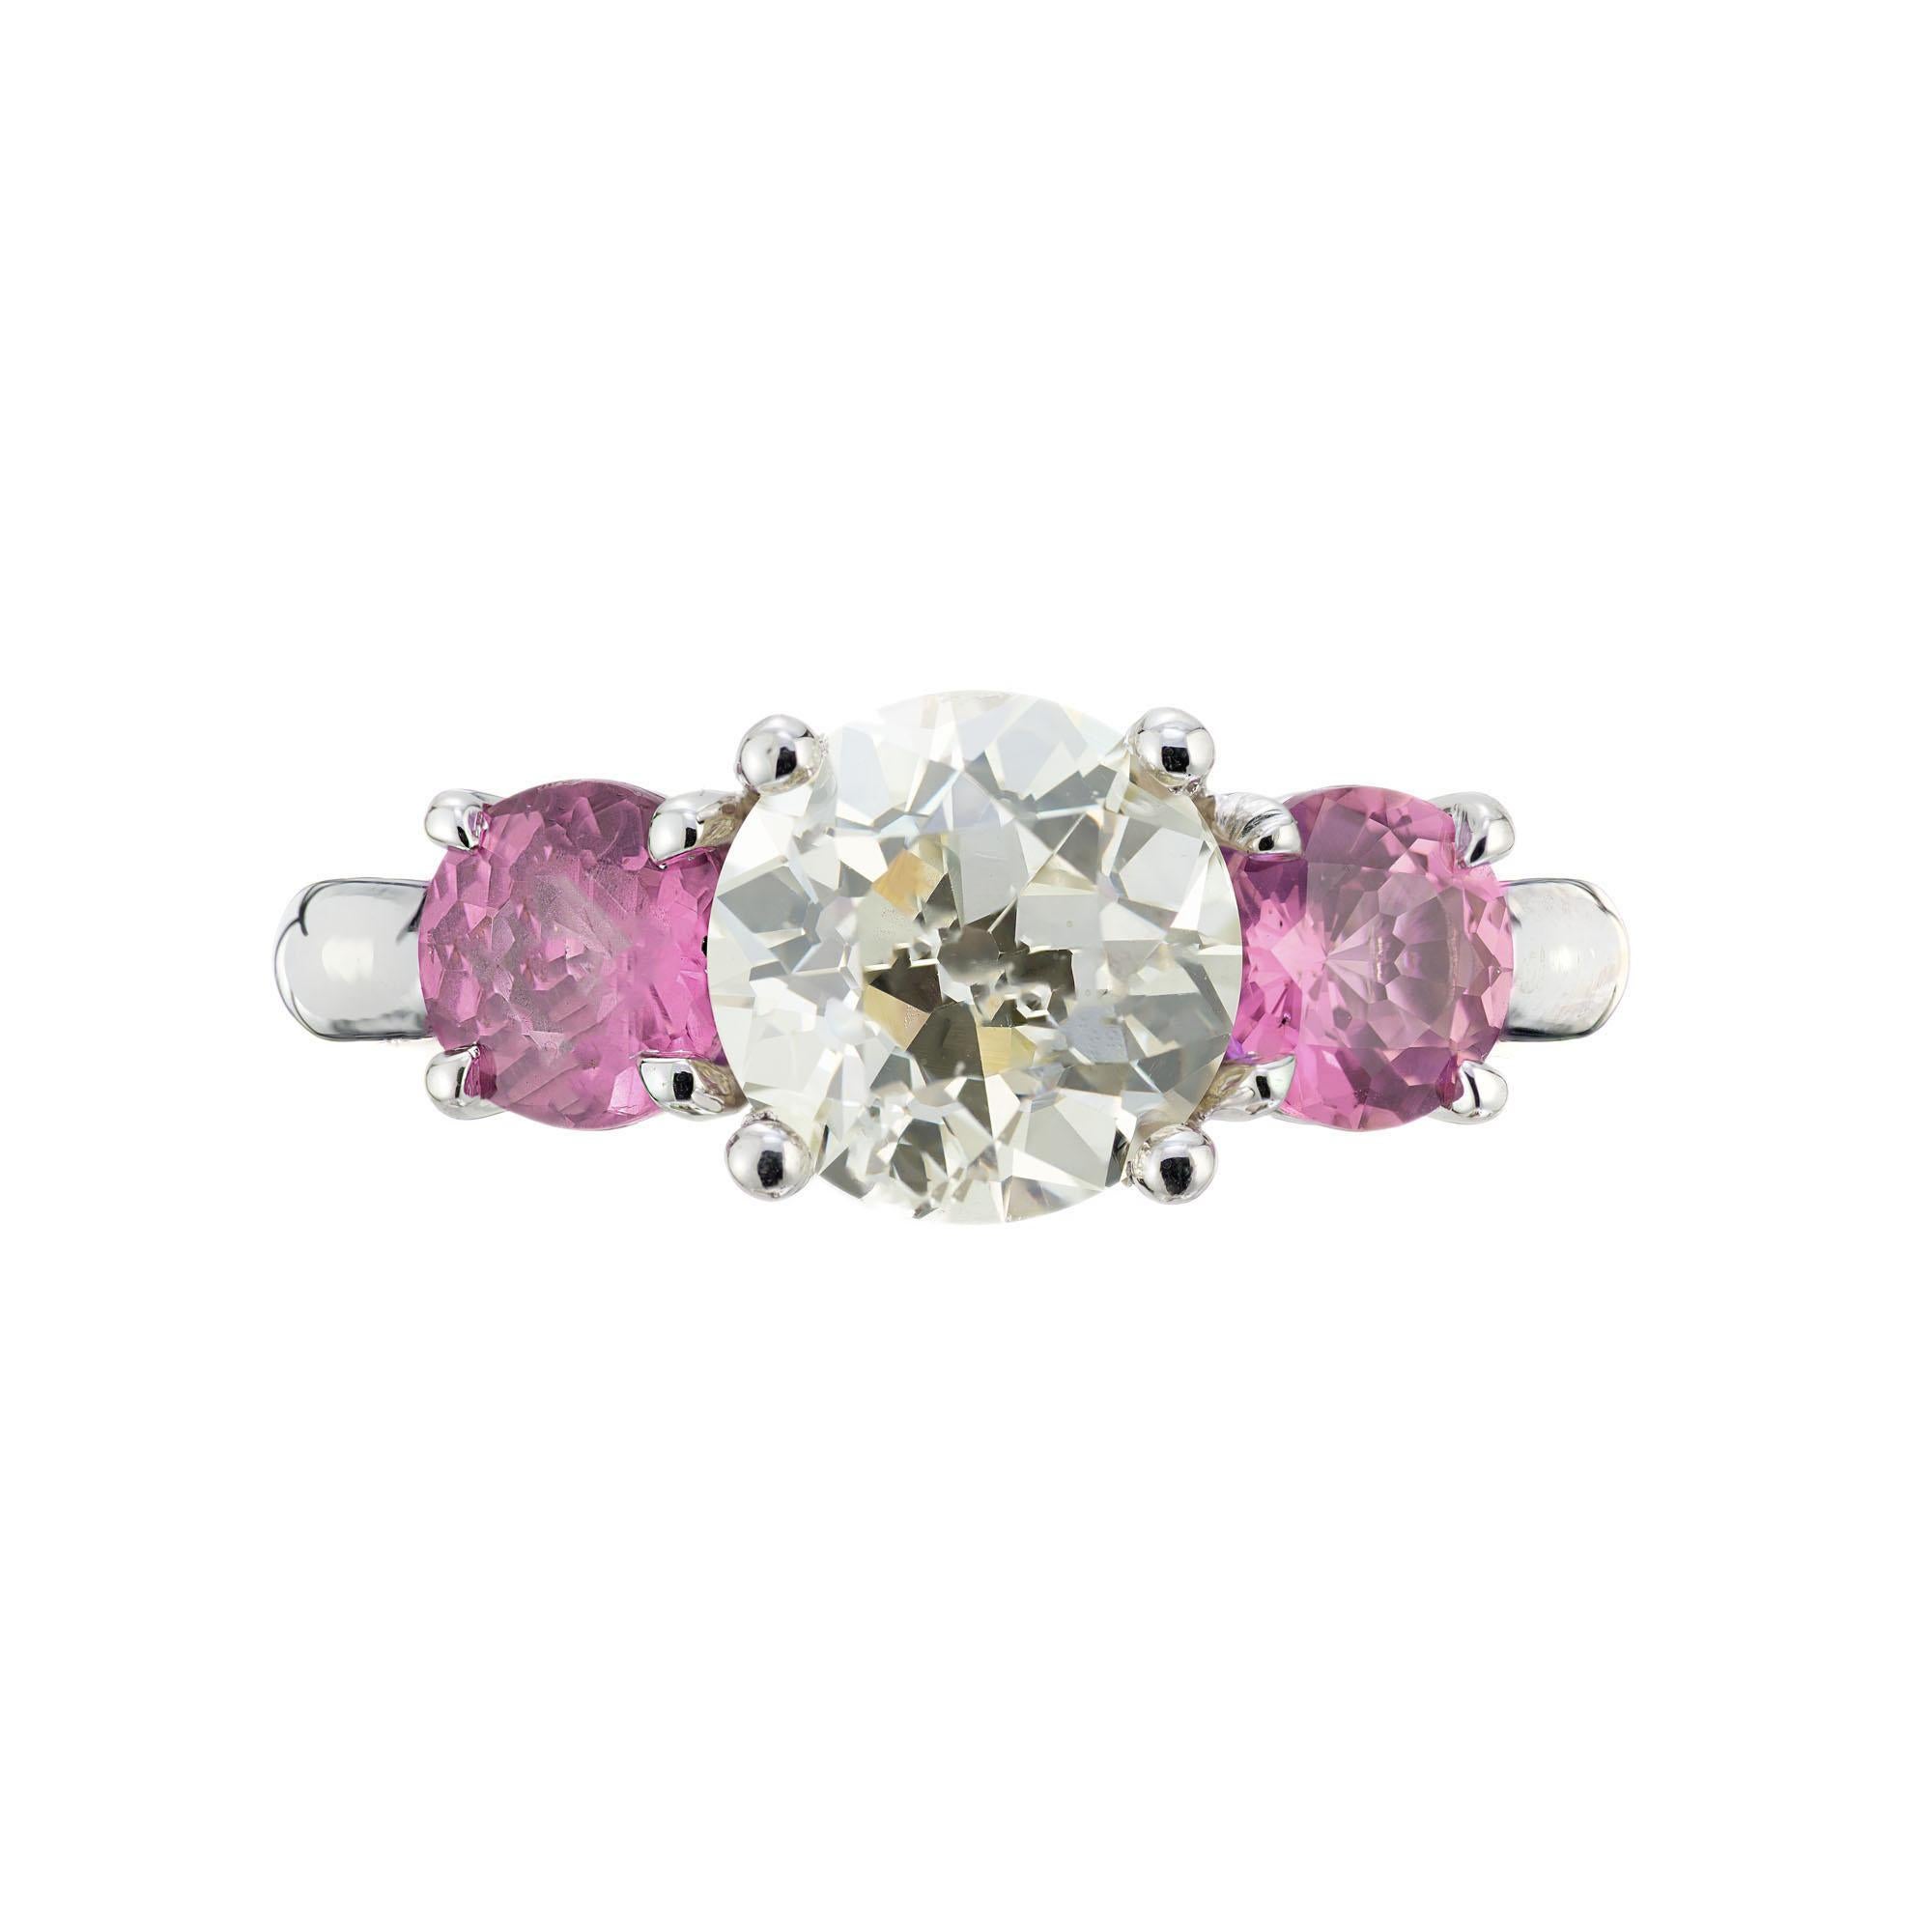 Pink Sapphire and Diamond Platinum three-stone engagement ring. GIA certified Old European cut center Diamond beautifully accented by two natural purplish pink round Sapphires. Set in a platinum mounting made in the Peter Suchy Workshop.

1 Old